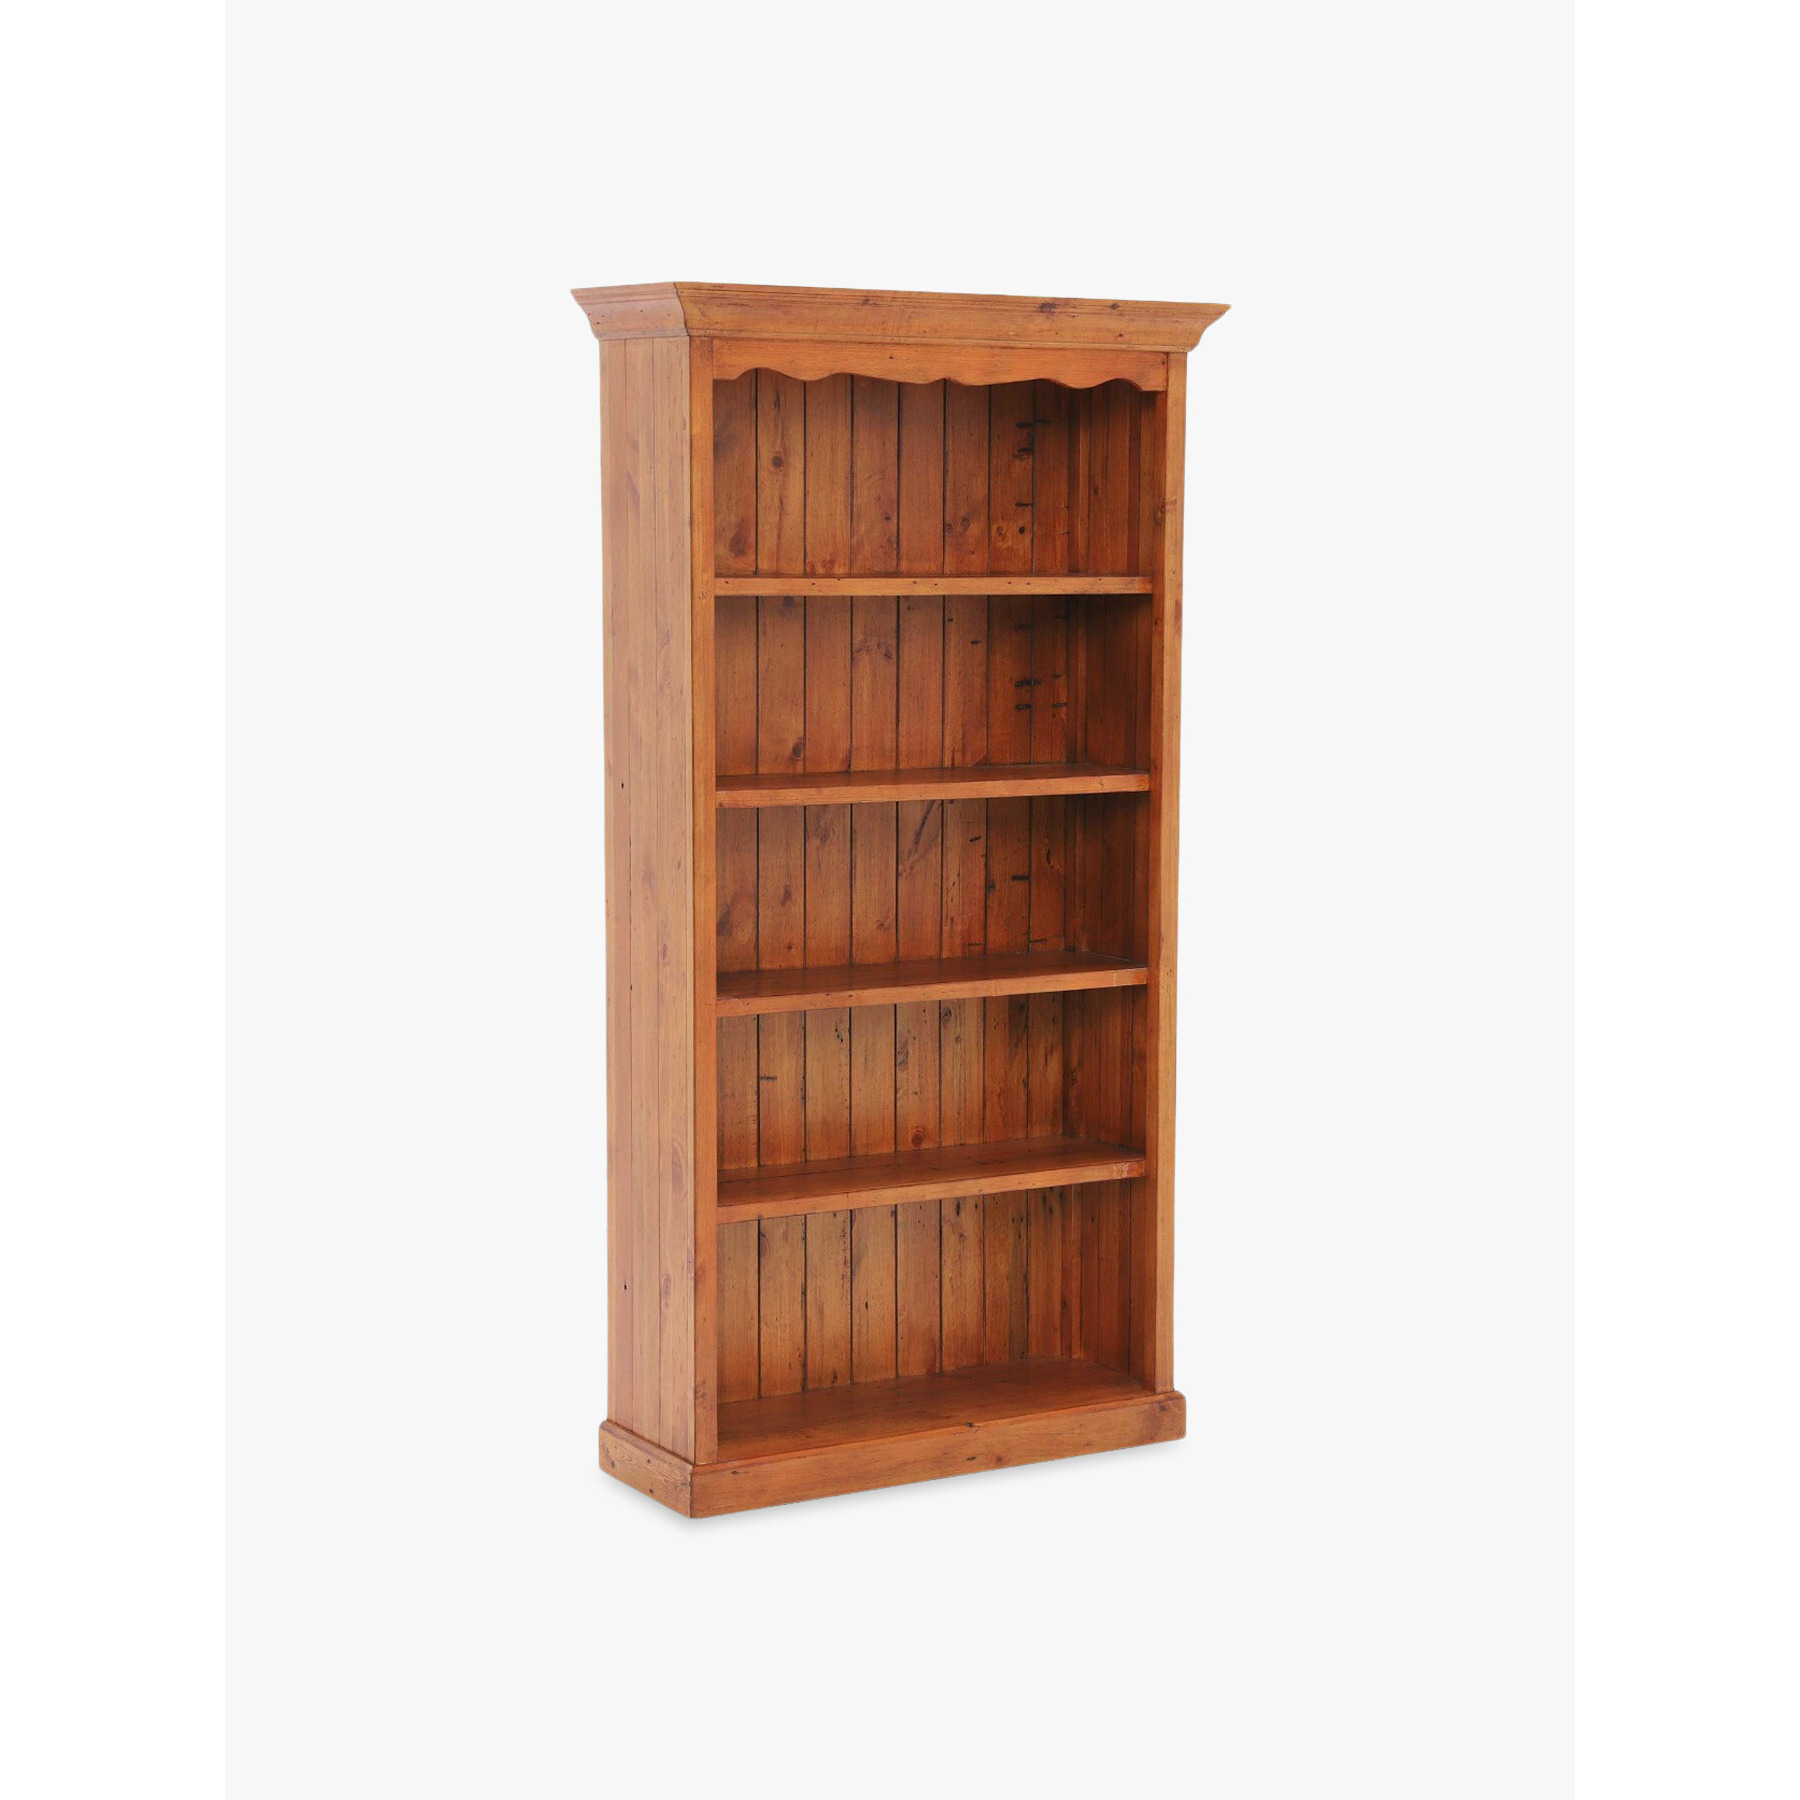 Barker and Stonehouse Villiers Reclaimed Wood Medium Bookcase Brown - image 1